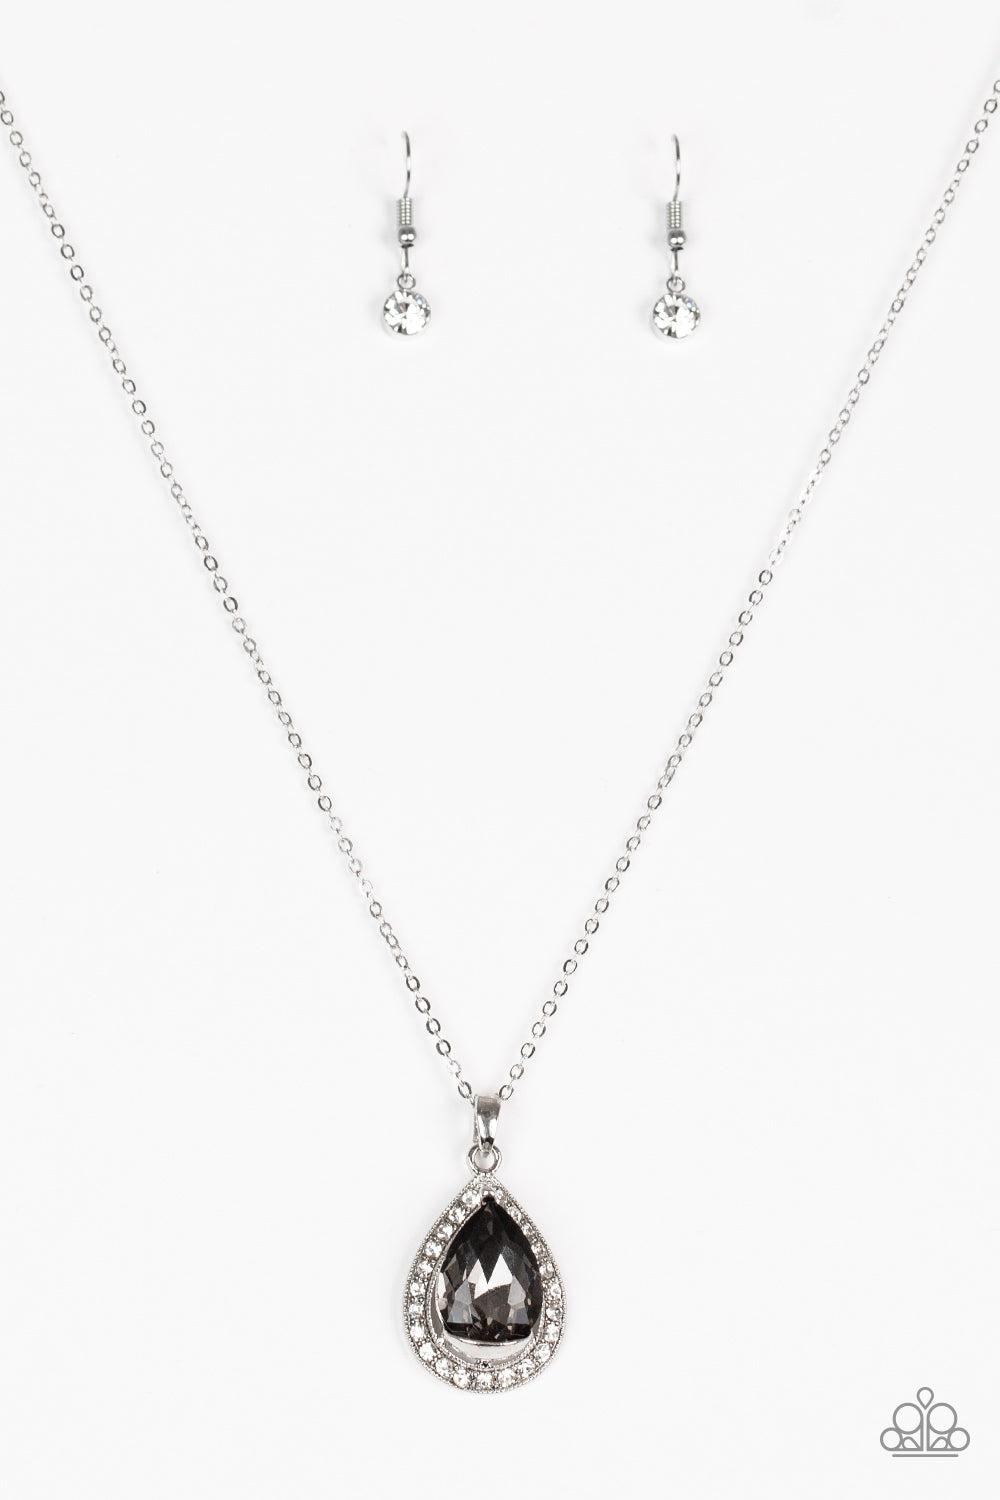 Paparazzi Because I'm Queen Silver Necklace | CarasShop